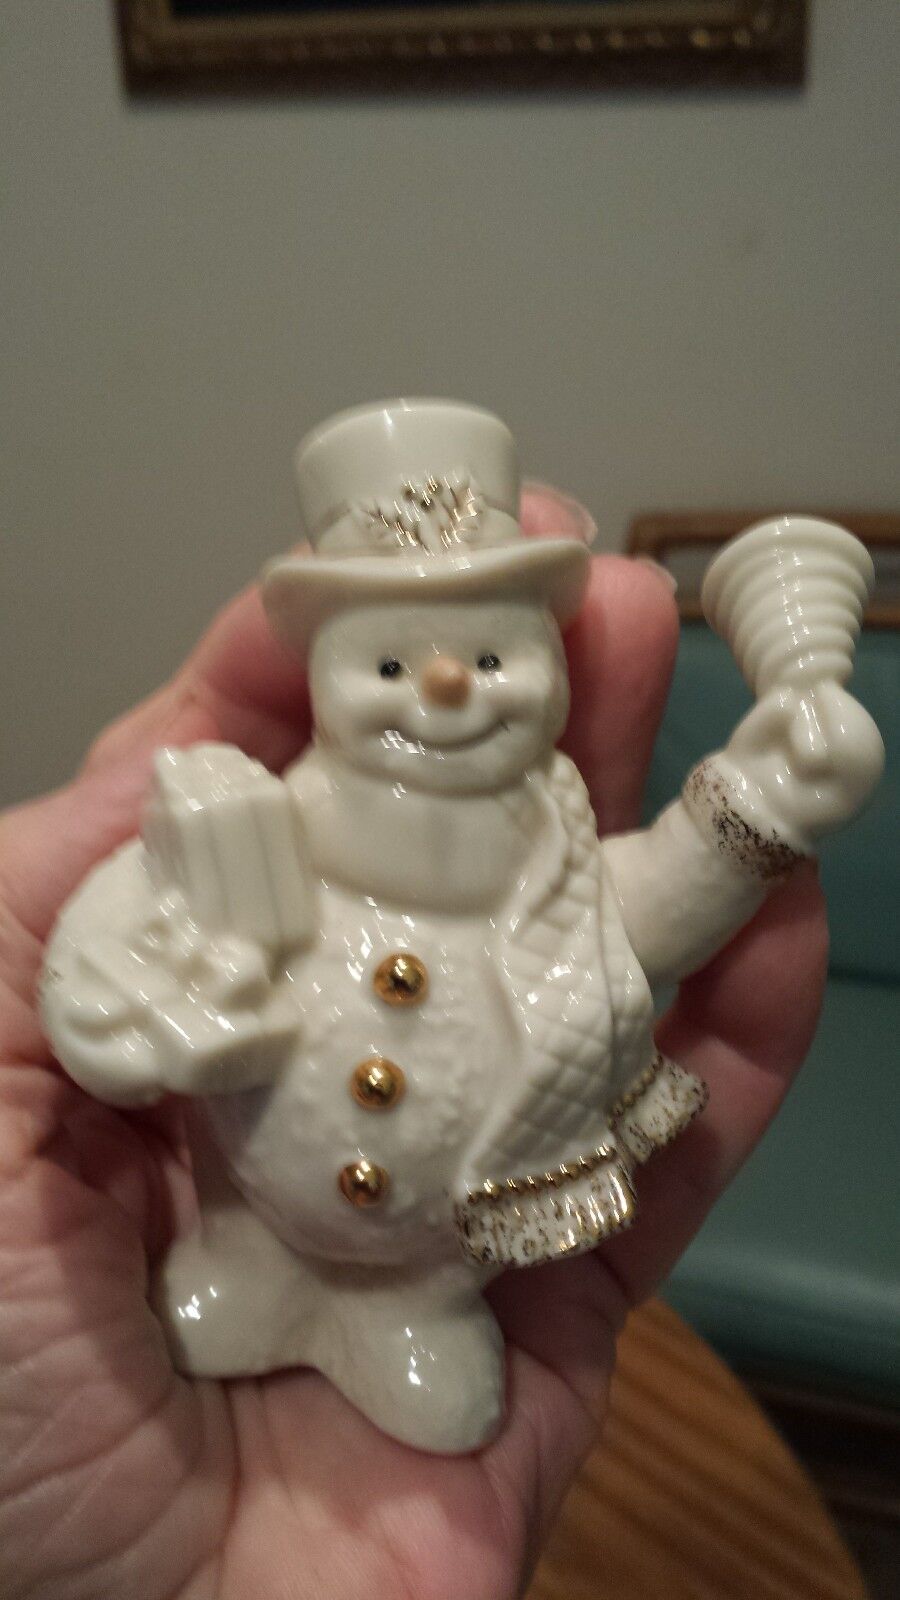 Lenox Vintage Porcelain Snowman with gold accents and no imperfections